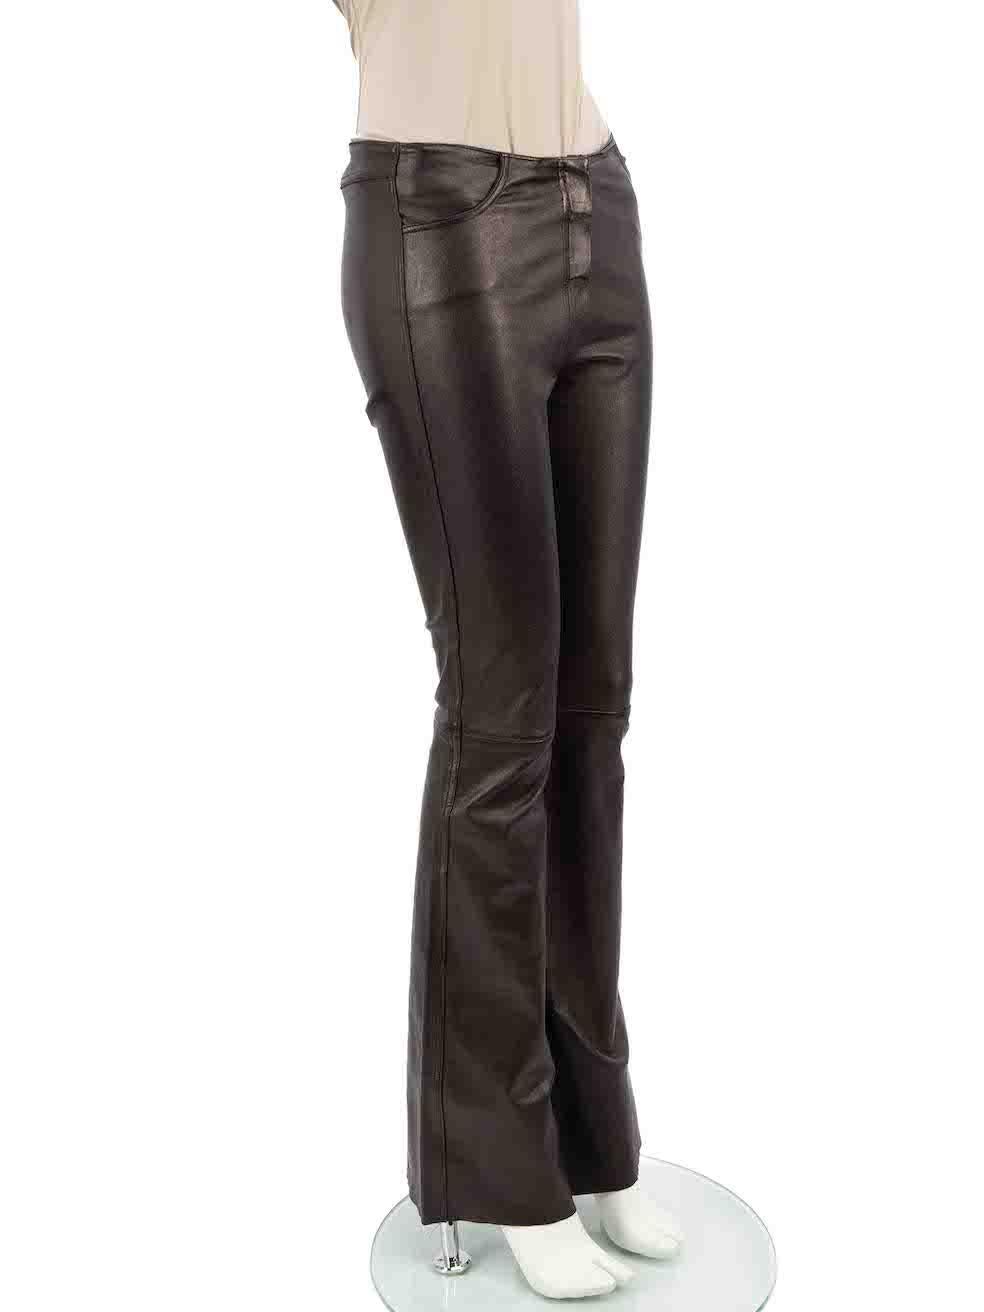 CONDITION is Very good. Minimal wear to trousers is evident. small scratches to the coating near the hem and waistband on this used Jitrois designer resale item.
 
 
 
 Details
 
 
 Black
 
 Leather
 
 Flared trousers
 
 Mid rise
 
 Regular length
